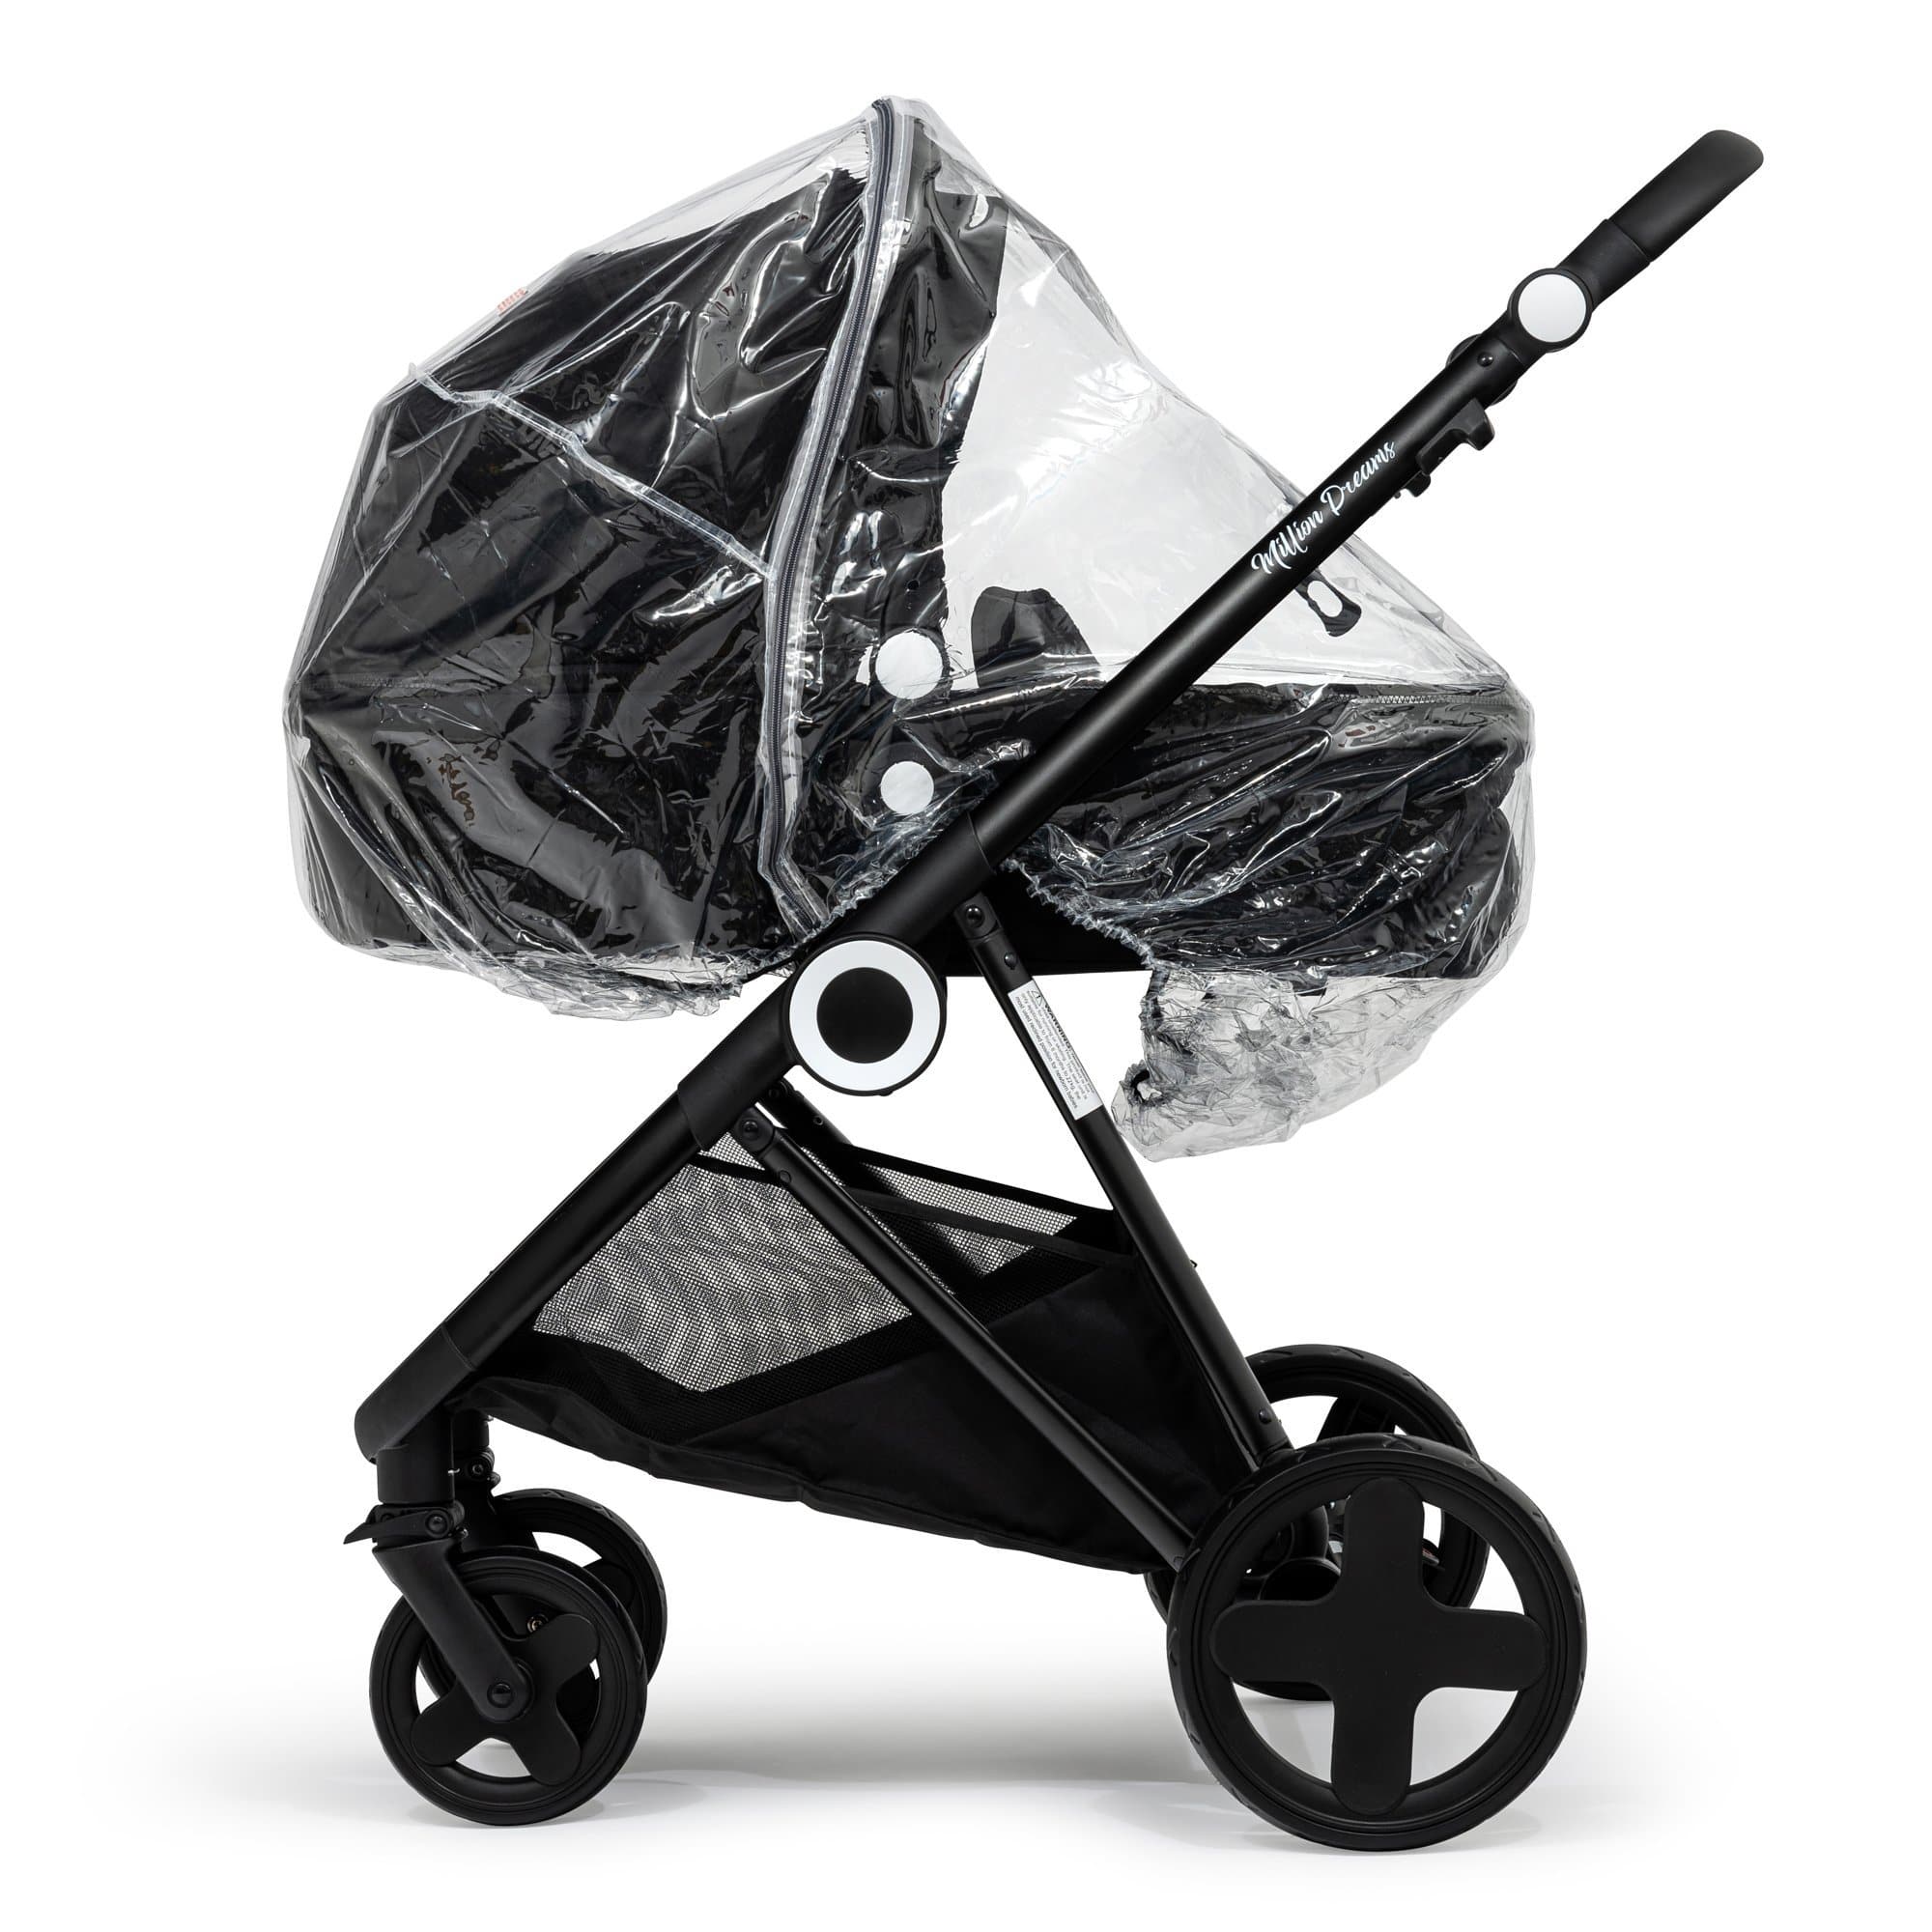 2 in 1 Rain Cover Compatible with Noukies - Fits All Models - For Your Little One